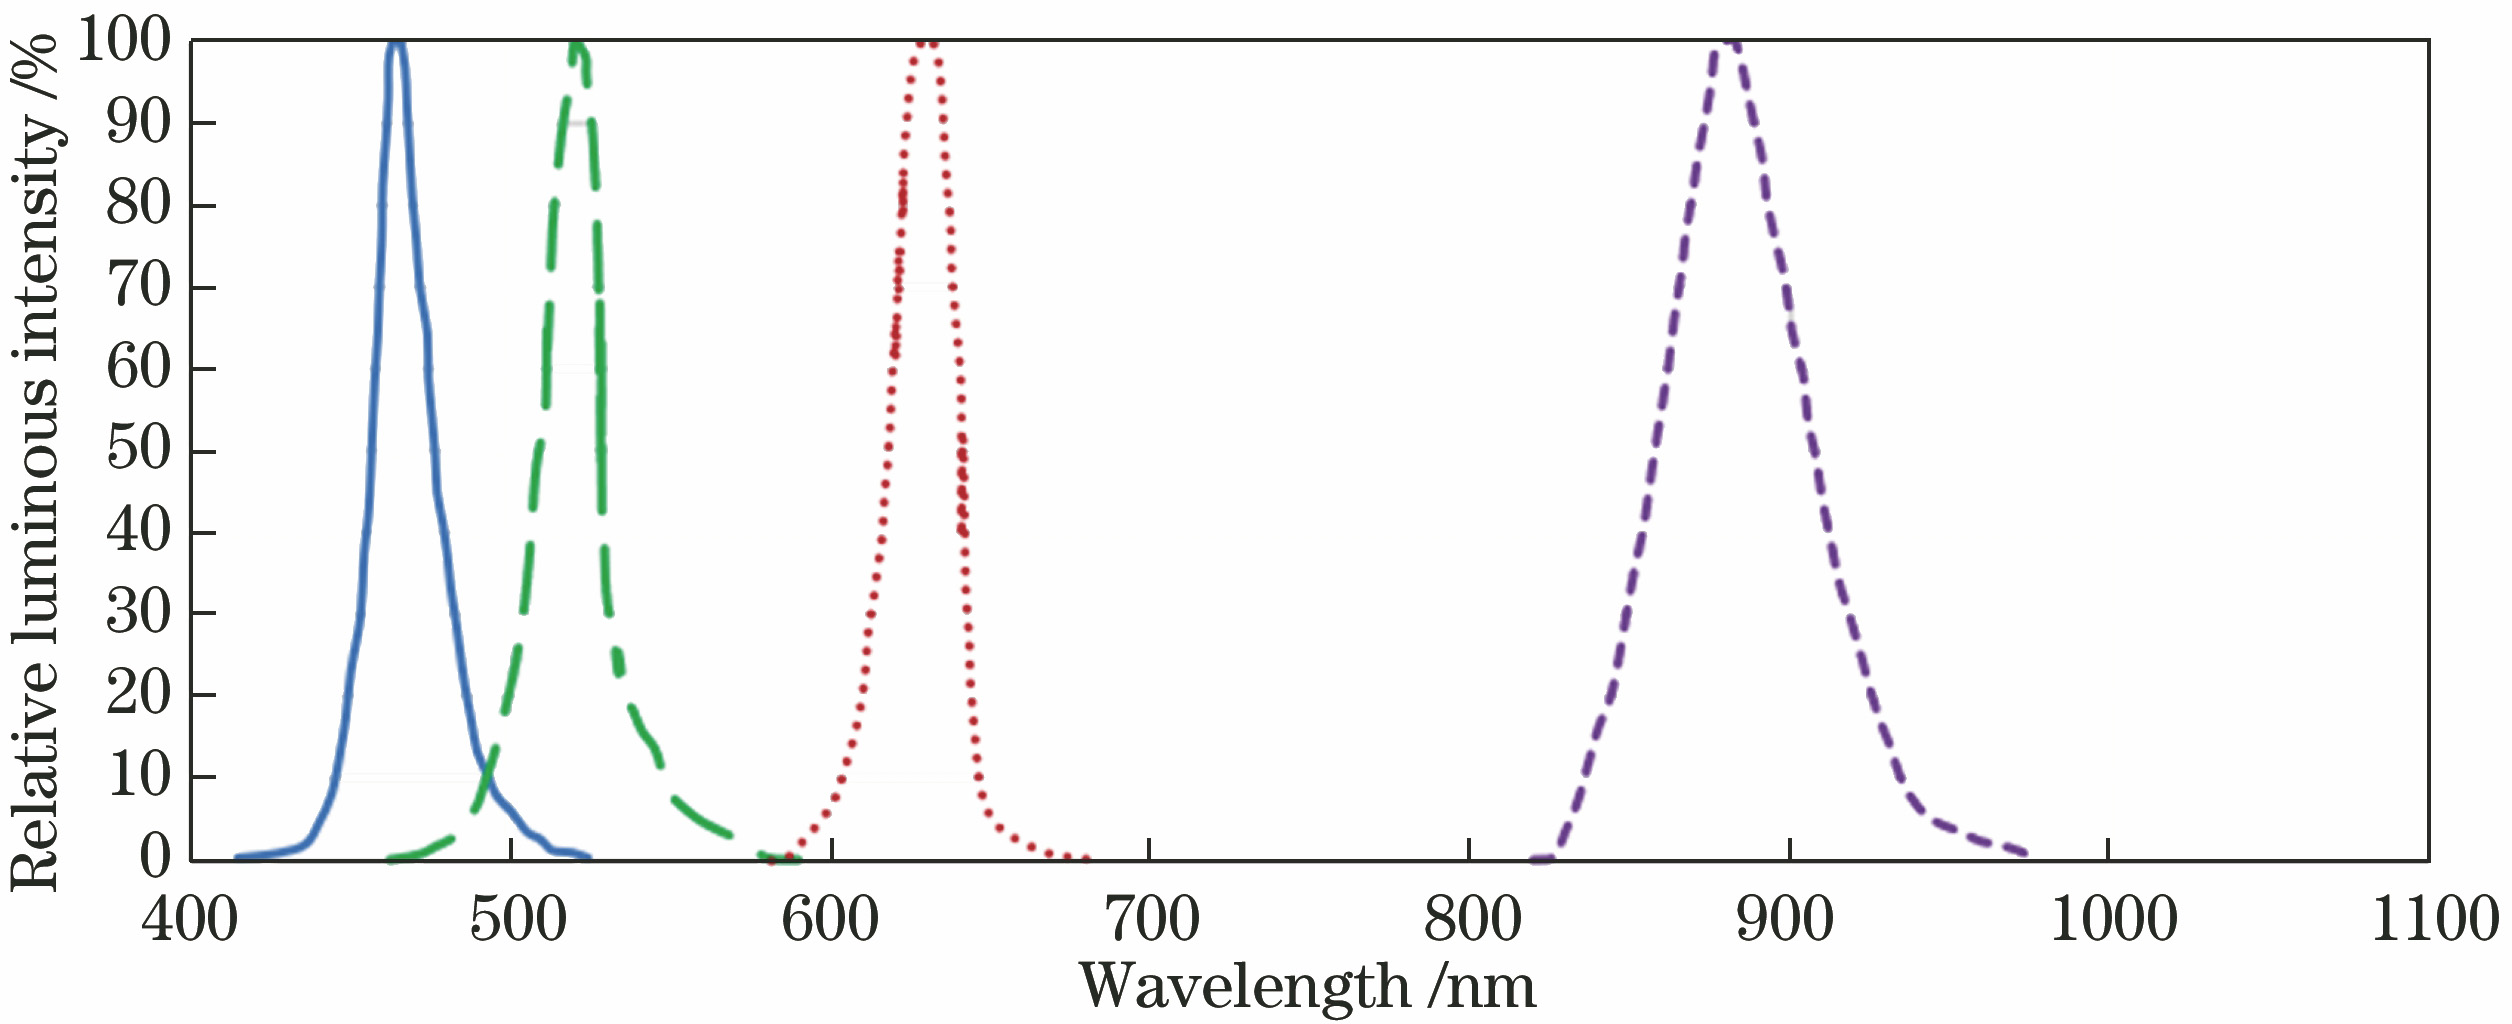 Spectral curves of four LED light sources